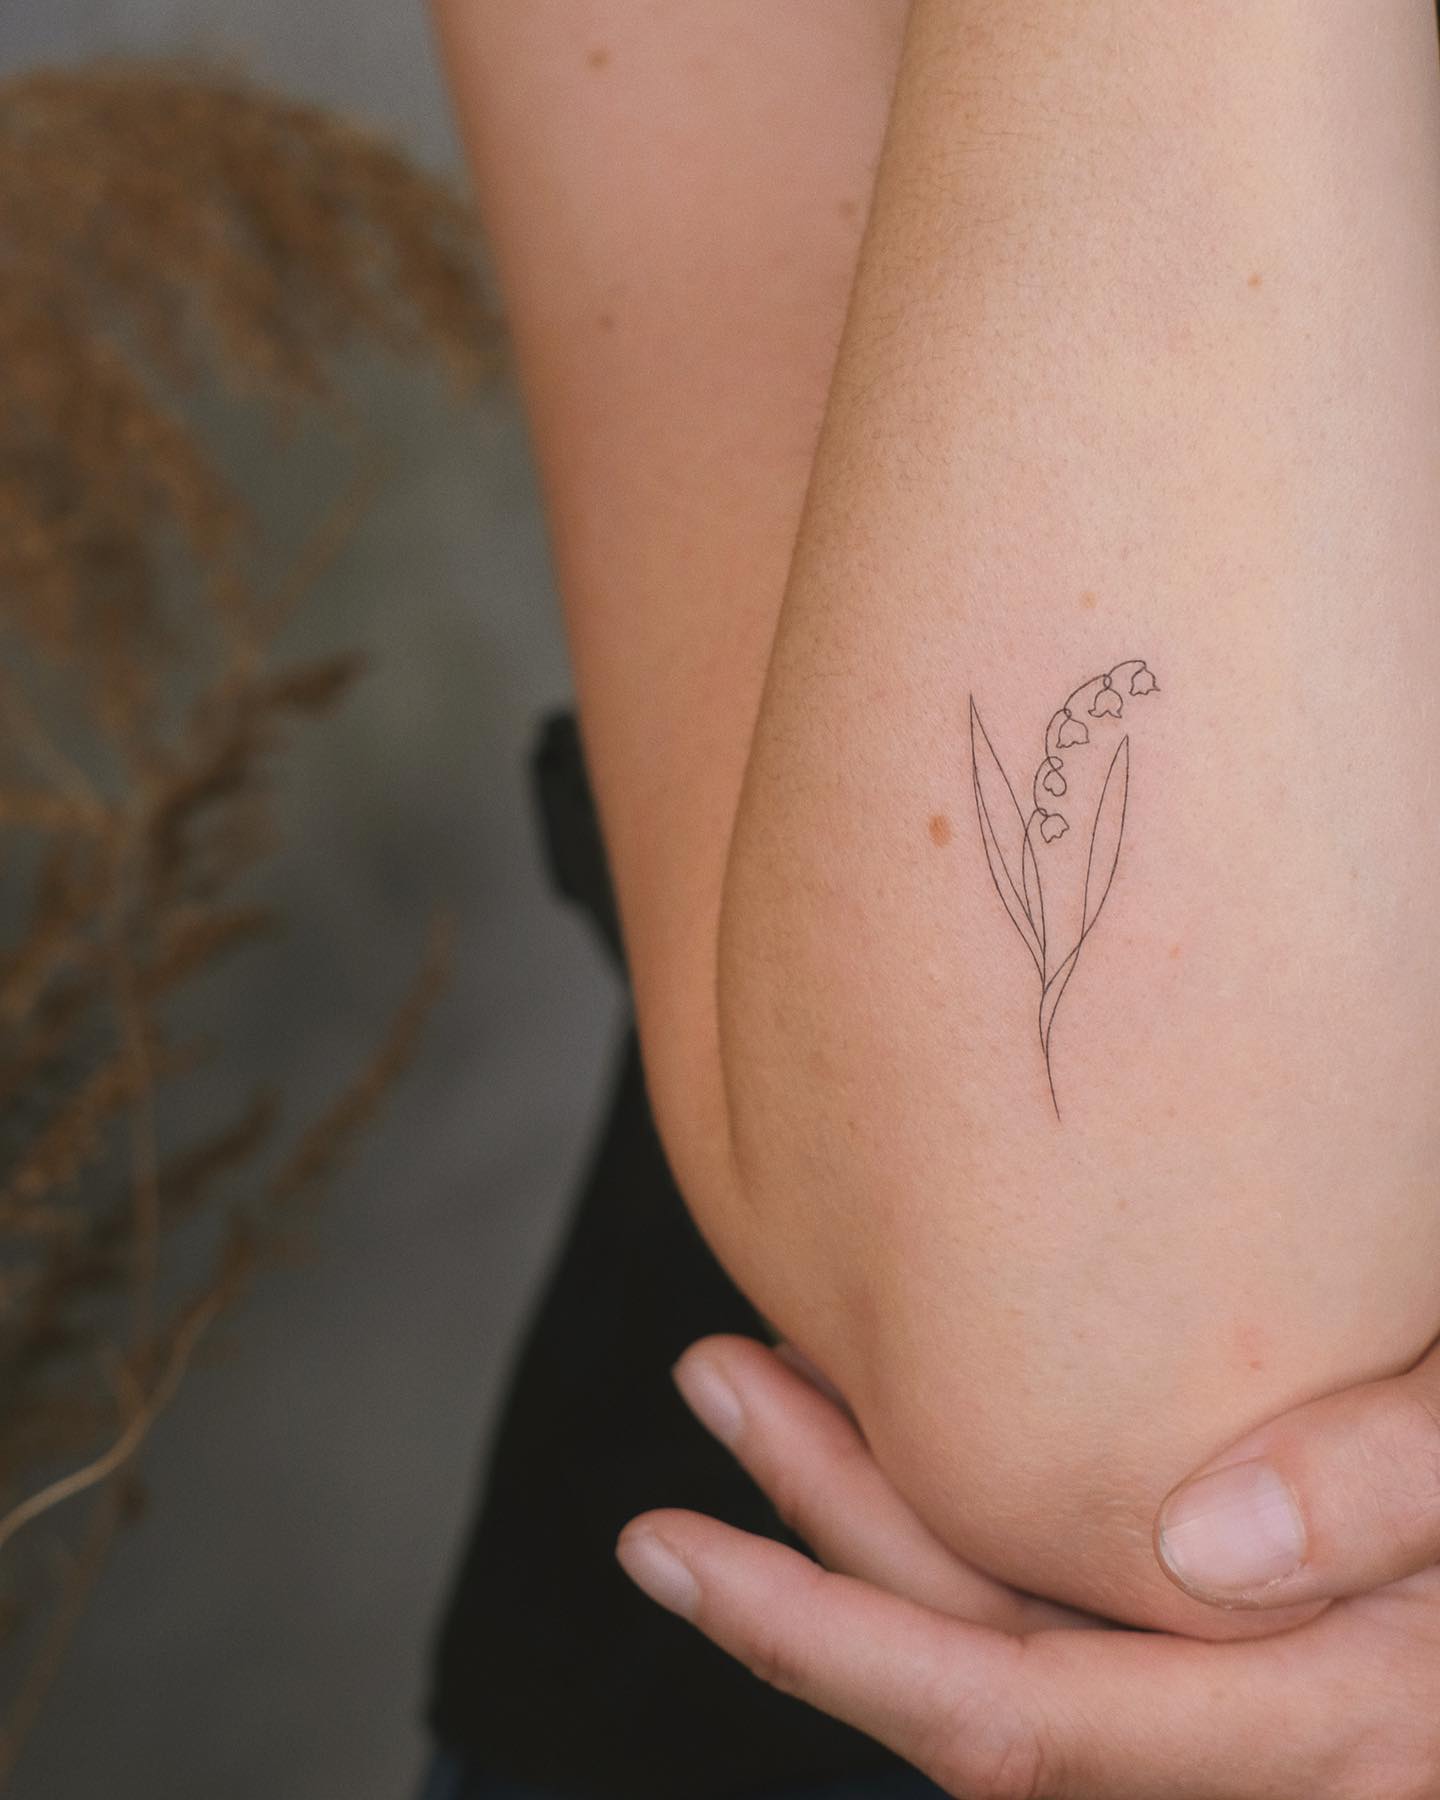 30 Unique Lily Tattoo Design Ideas You Would Love to Have  100 Tattoos